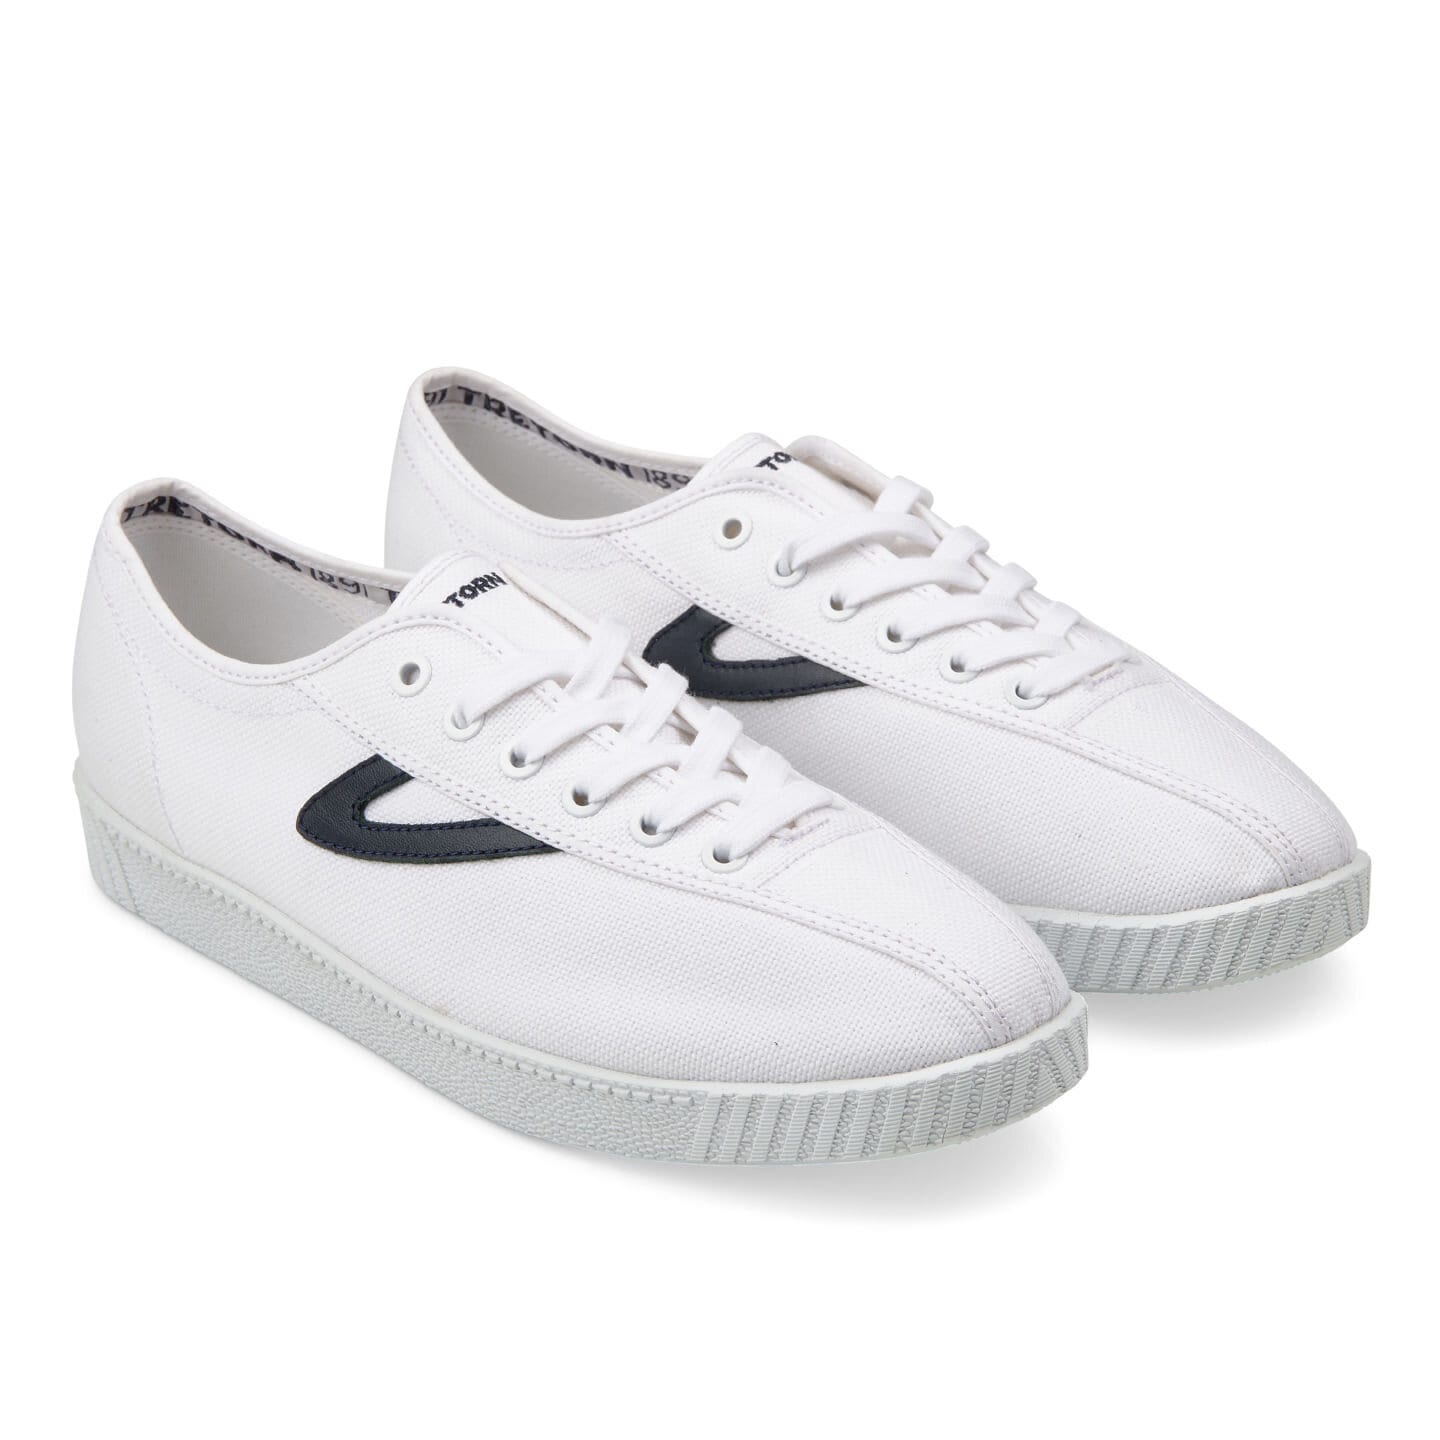 Nylite Sneakers by Tretorn for men and women in the colour white and black